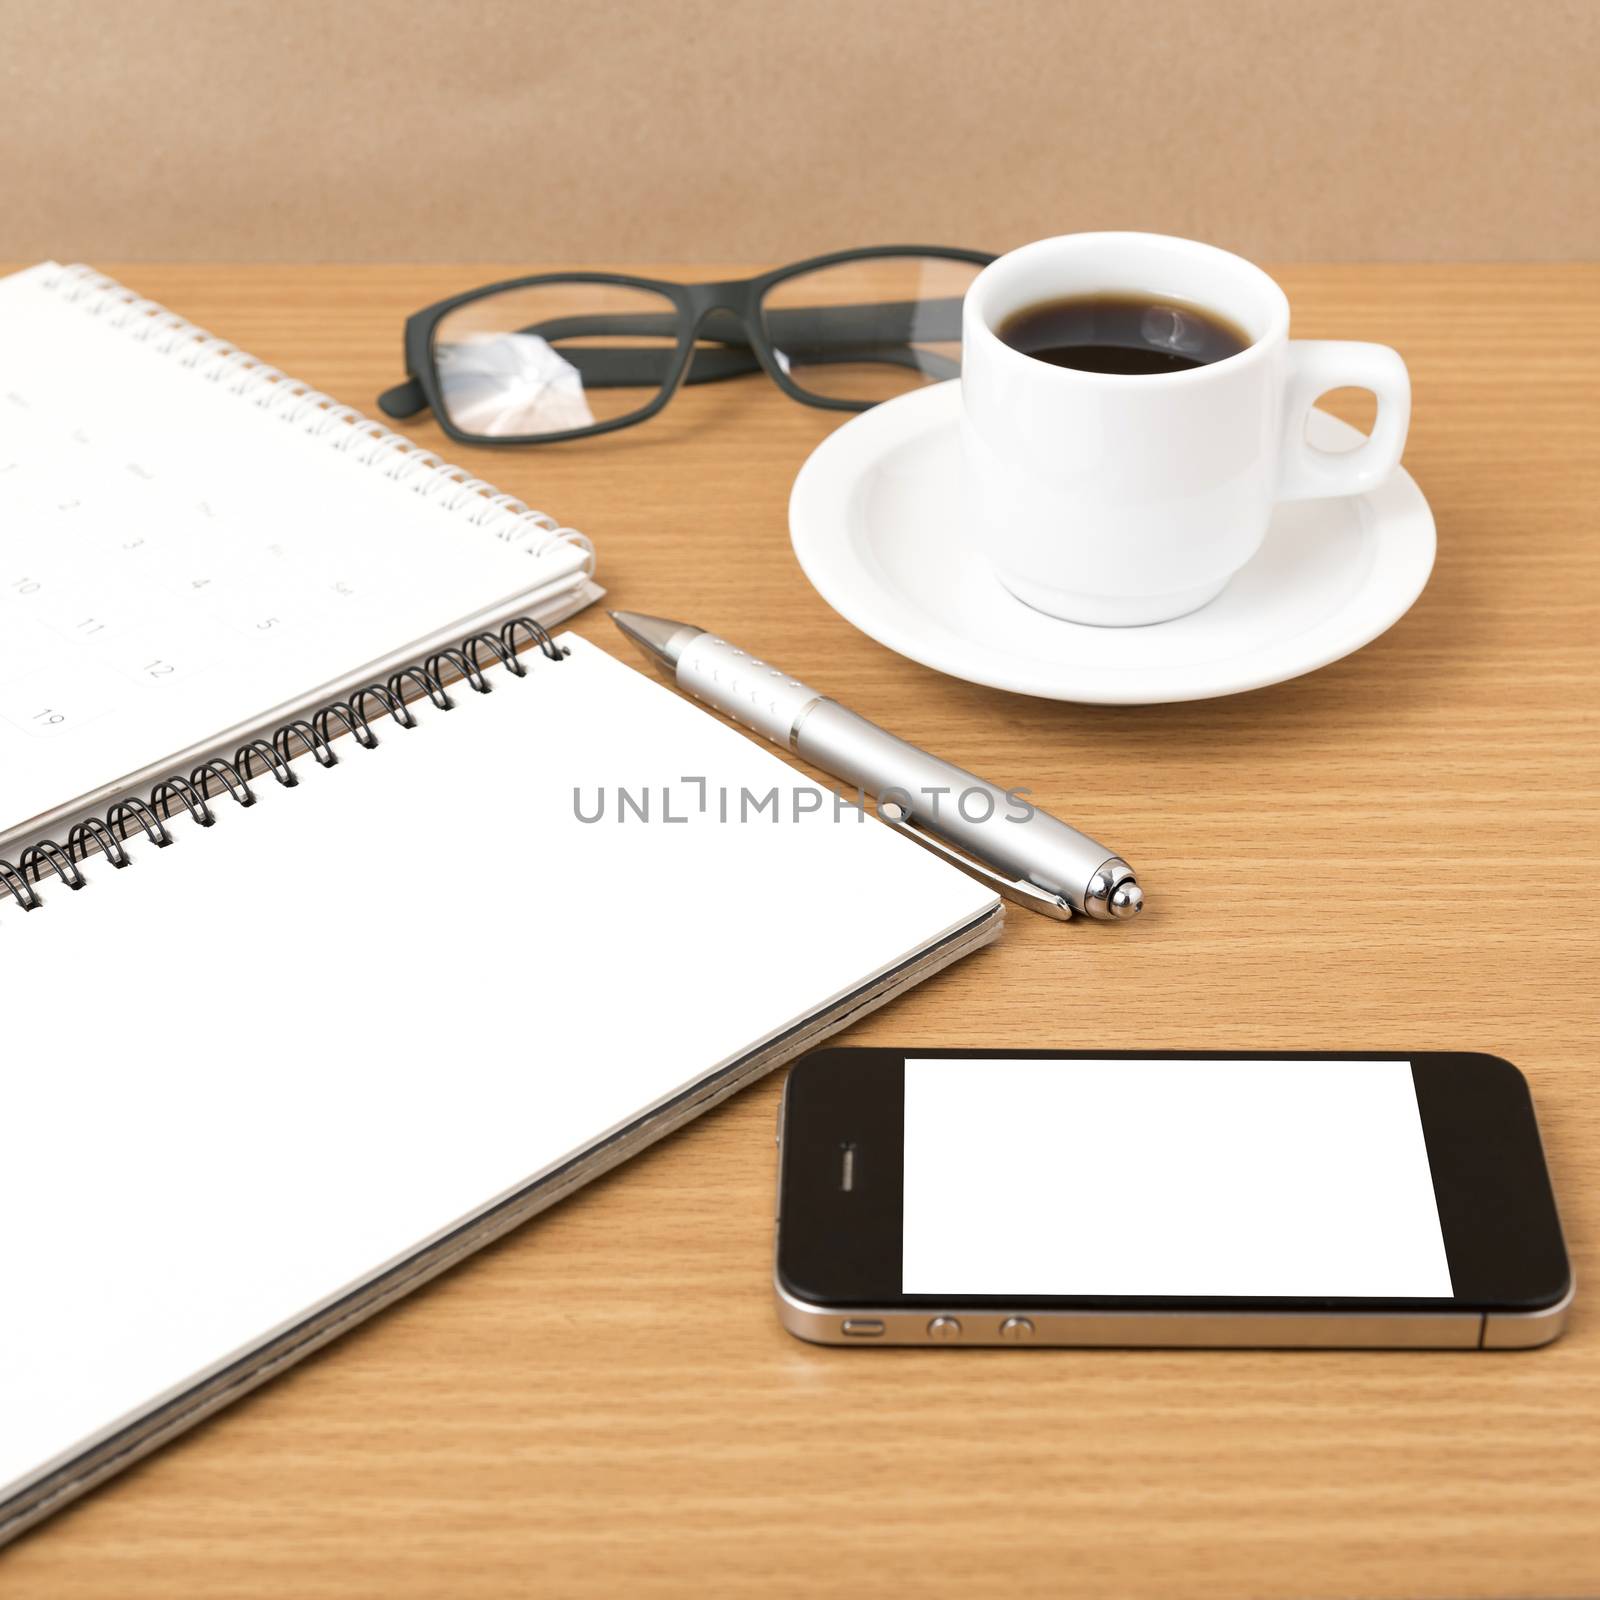 coffee,phone,eyeglasses,notepad and canlendar on wood table background